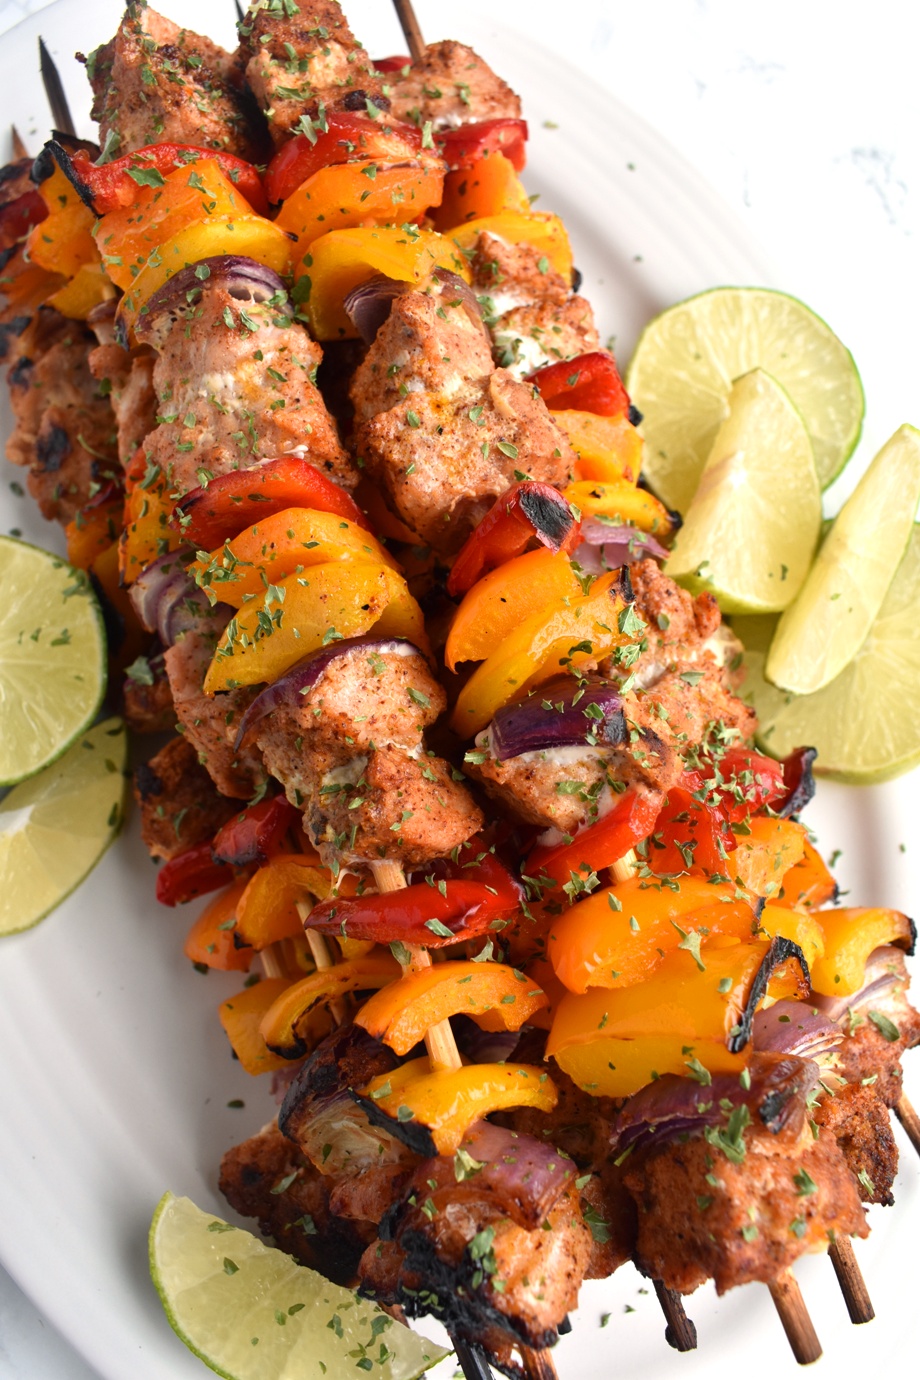 Pork Fajita Kebabs are ready in 30 minutes, are full of fajita flavors and are nutritious with marinated fajita lime pork, colorful bell peppers and onions!